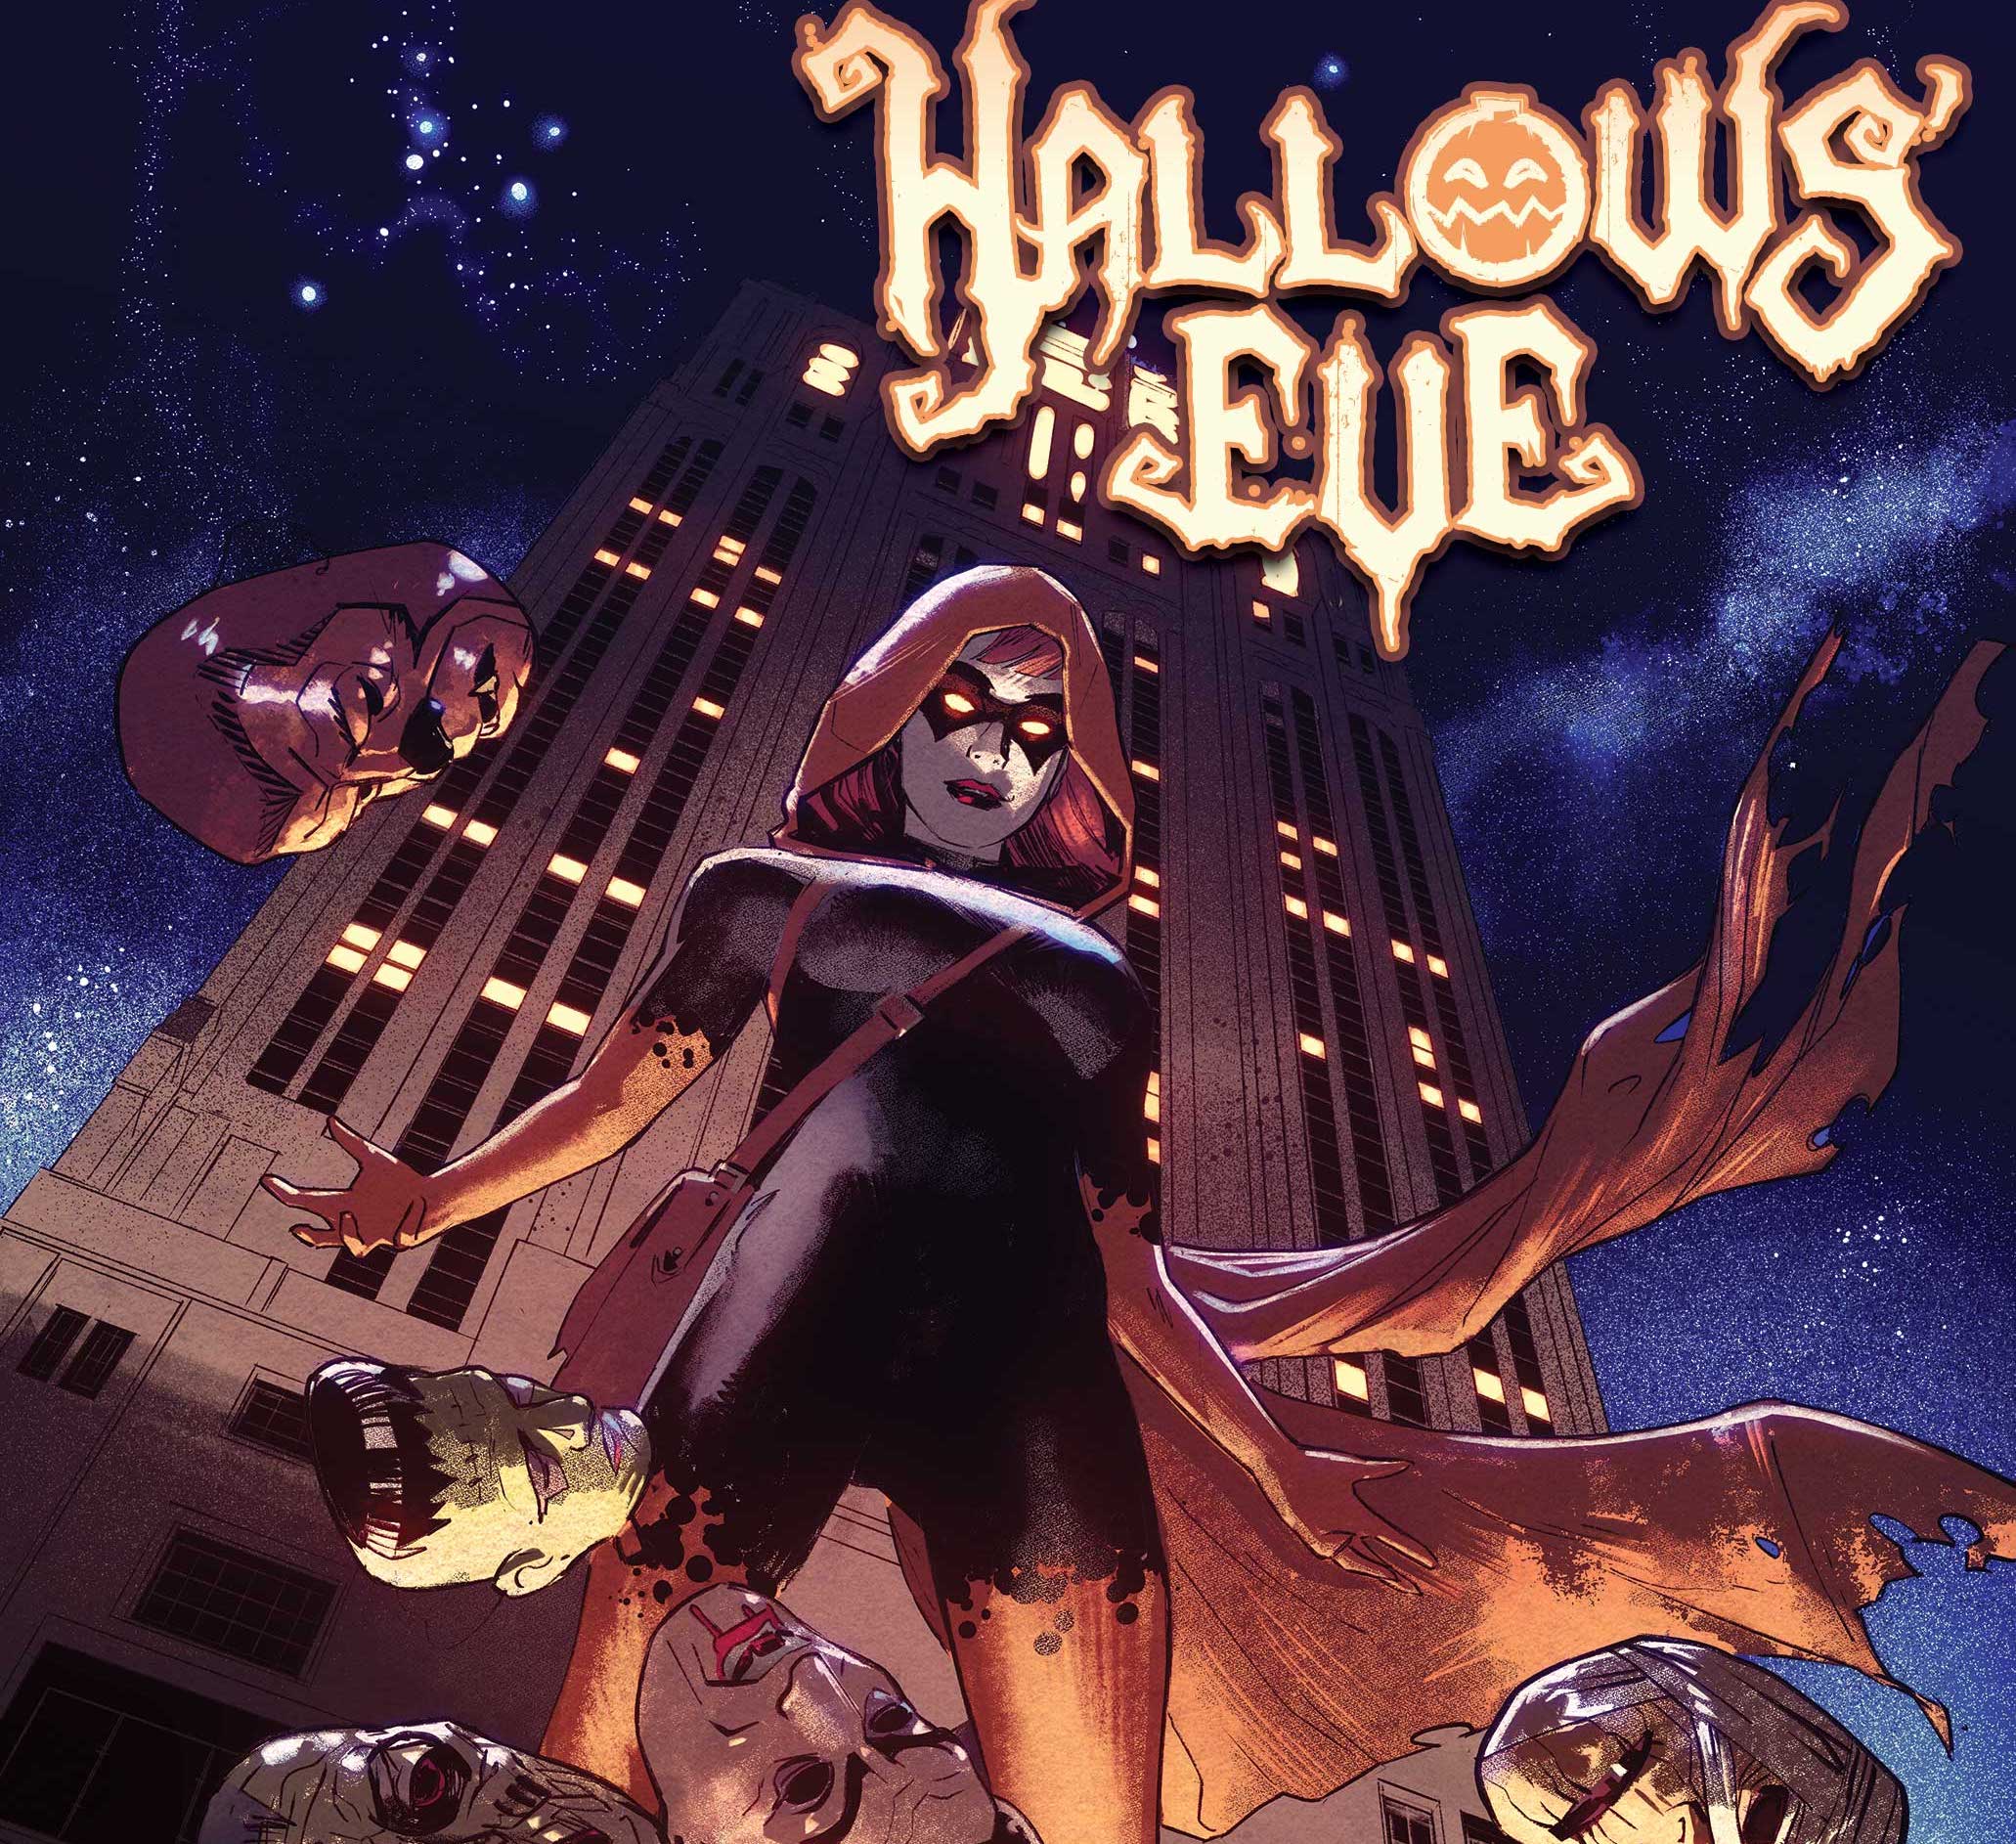 Marvel to launch 'Hallows' Eve' March 2023 spinning out of 'Spider-Man'